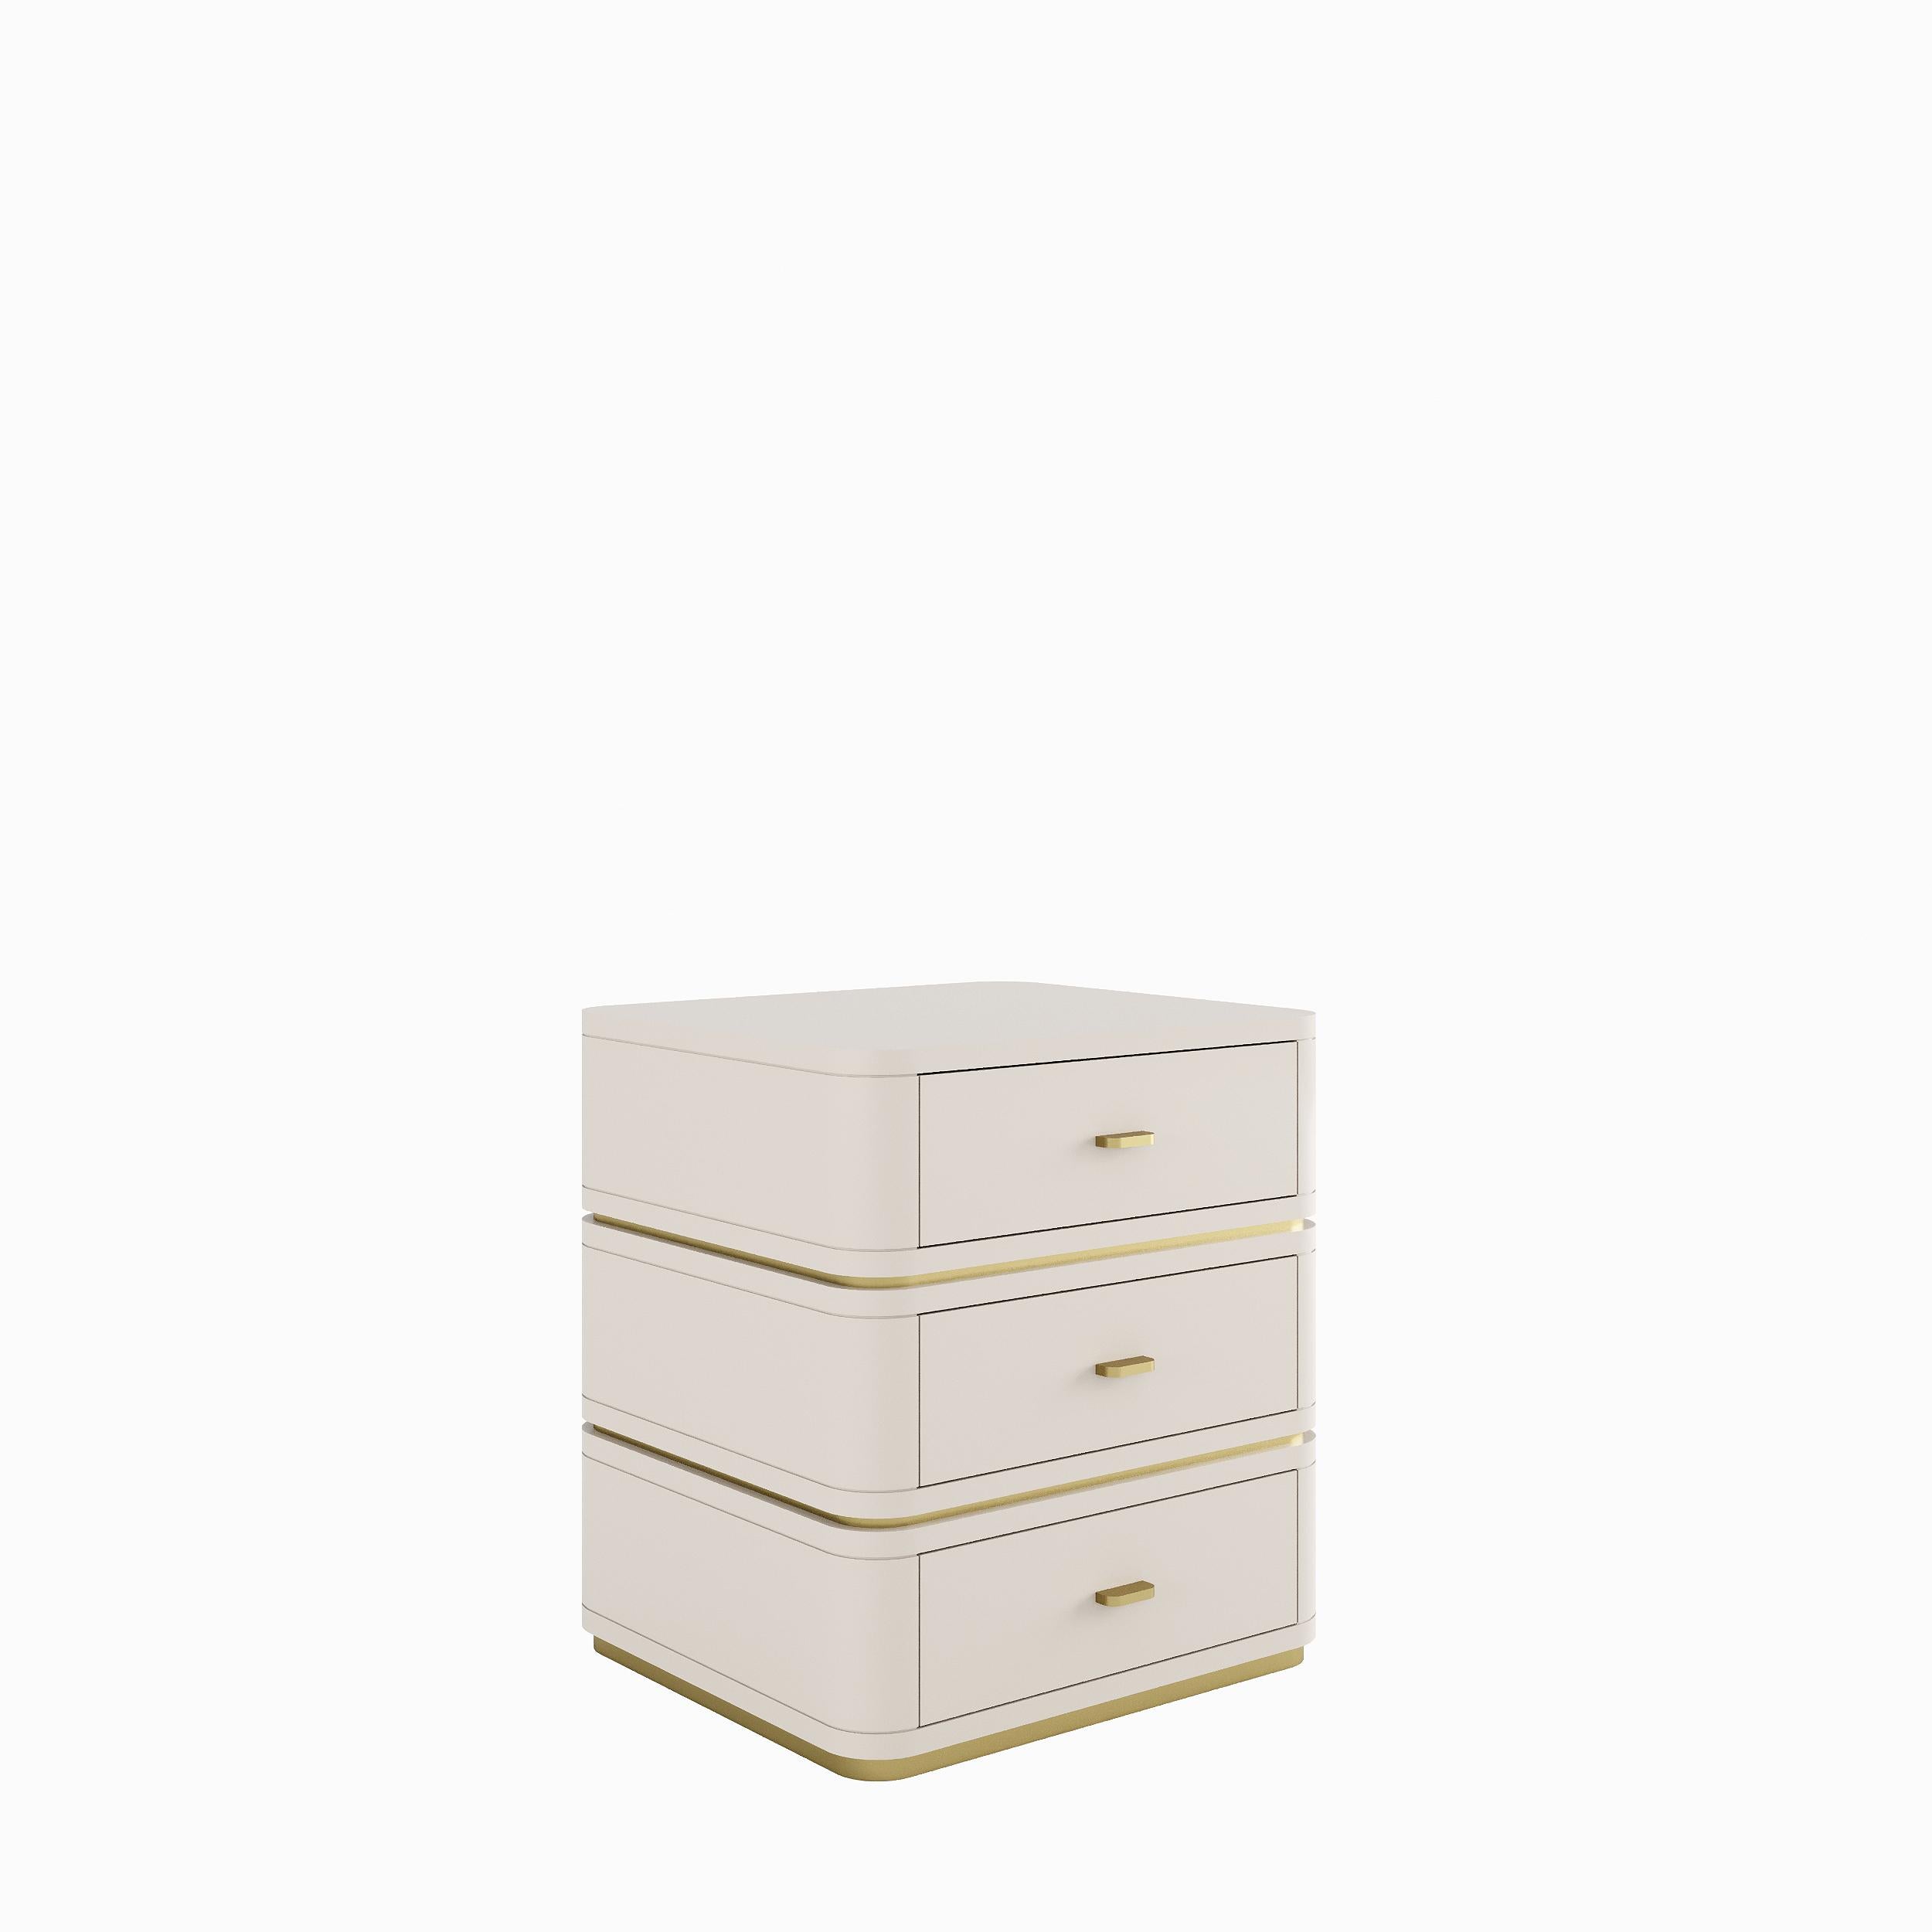 Robust and at the same time very elegant, the Cris bedside table is suitable for bedrooms with classic or contemporary style.‎ Cris, equipped with 3 drawers, finished in matte or glossy lacquer or veneered wood. Optional inlaid detail between